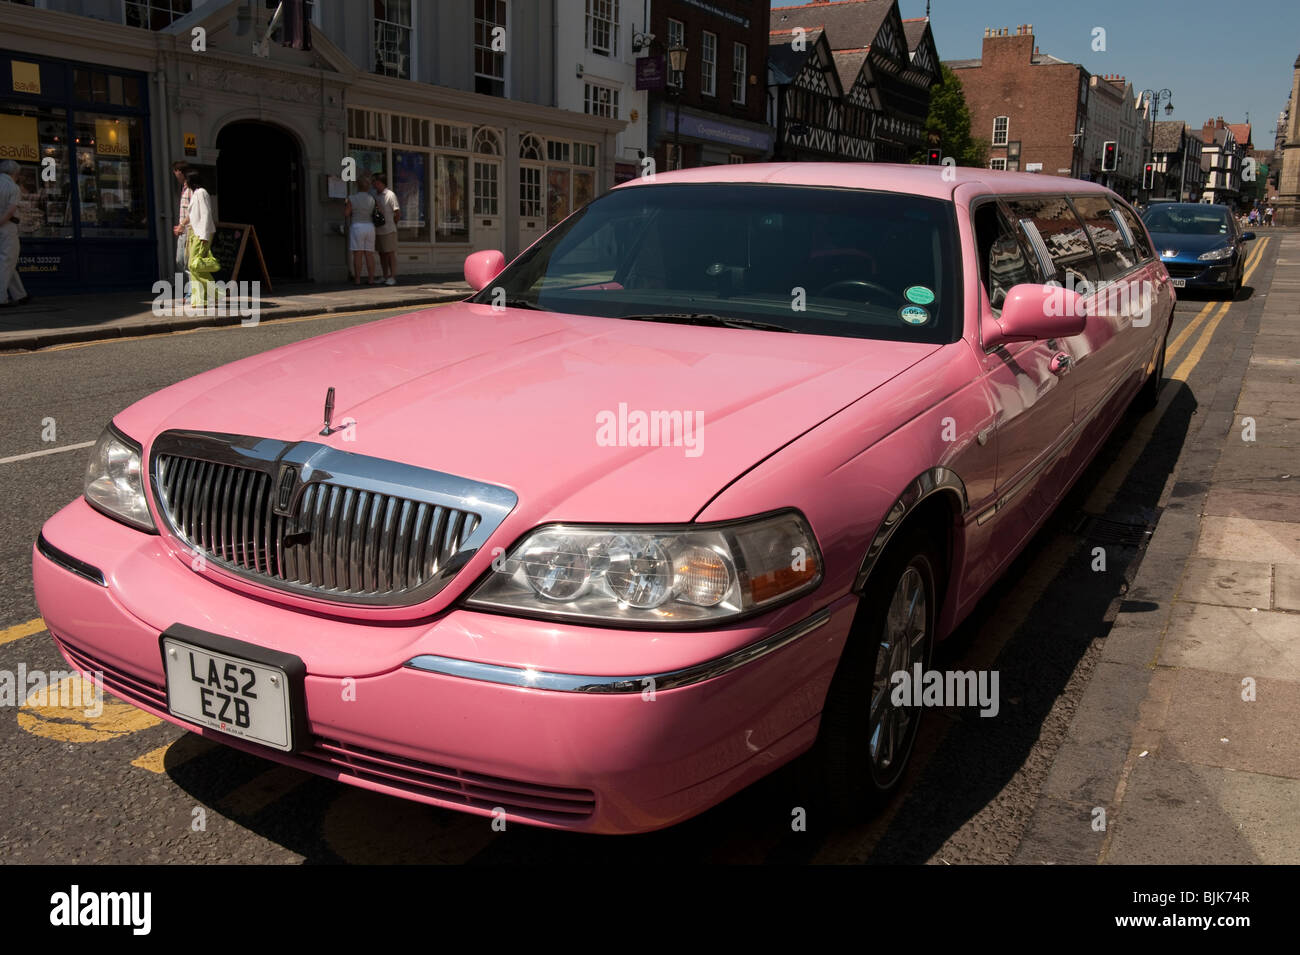 Pink stretch Limousine  Limo American car UK Stock Photo